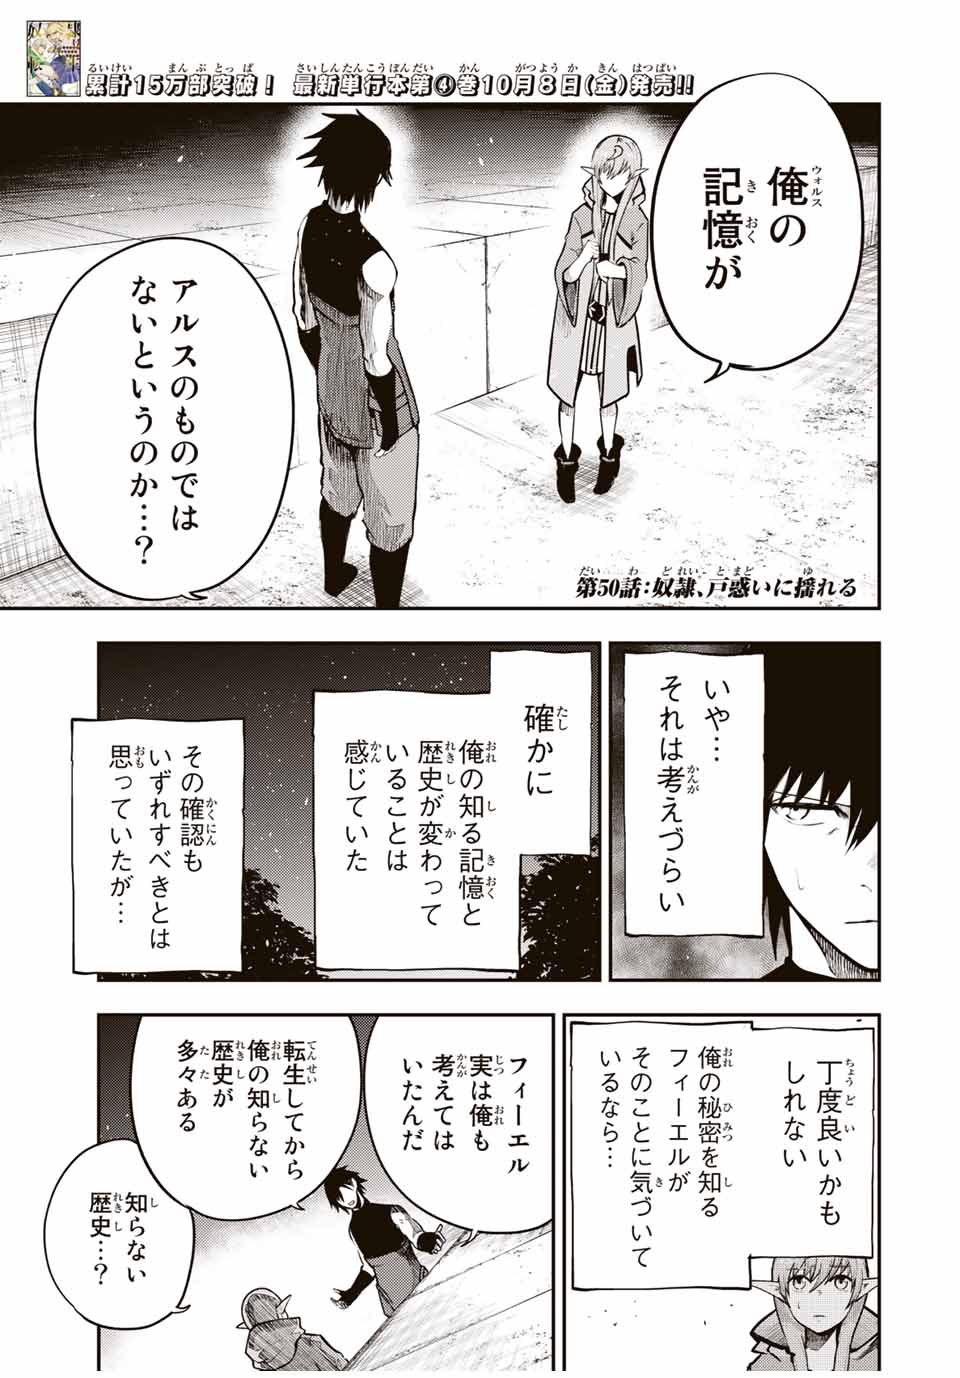 the strongest former prince-; 奴隷転生 ～その奴隷、最強の元王子につき～ 第50話 - Page 1